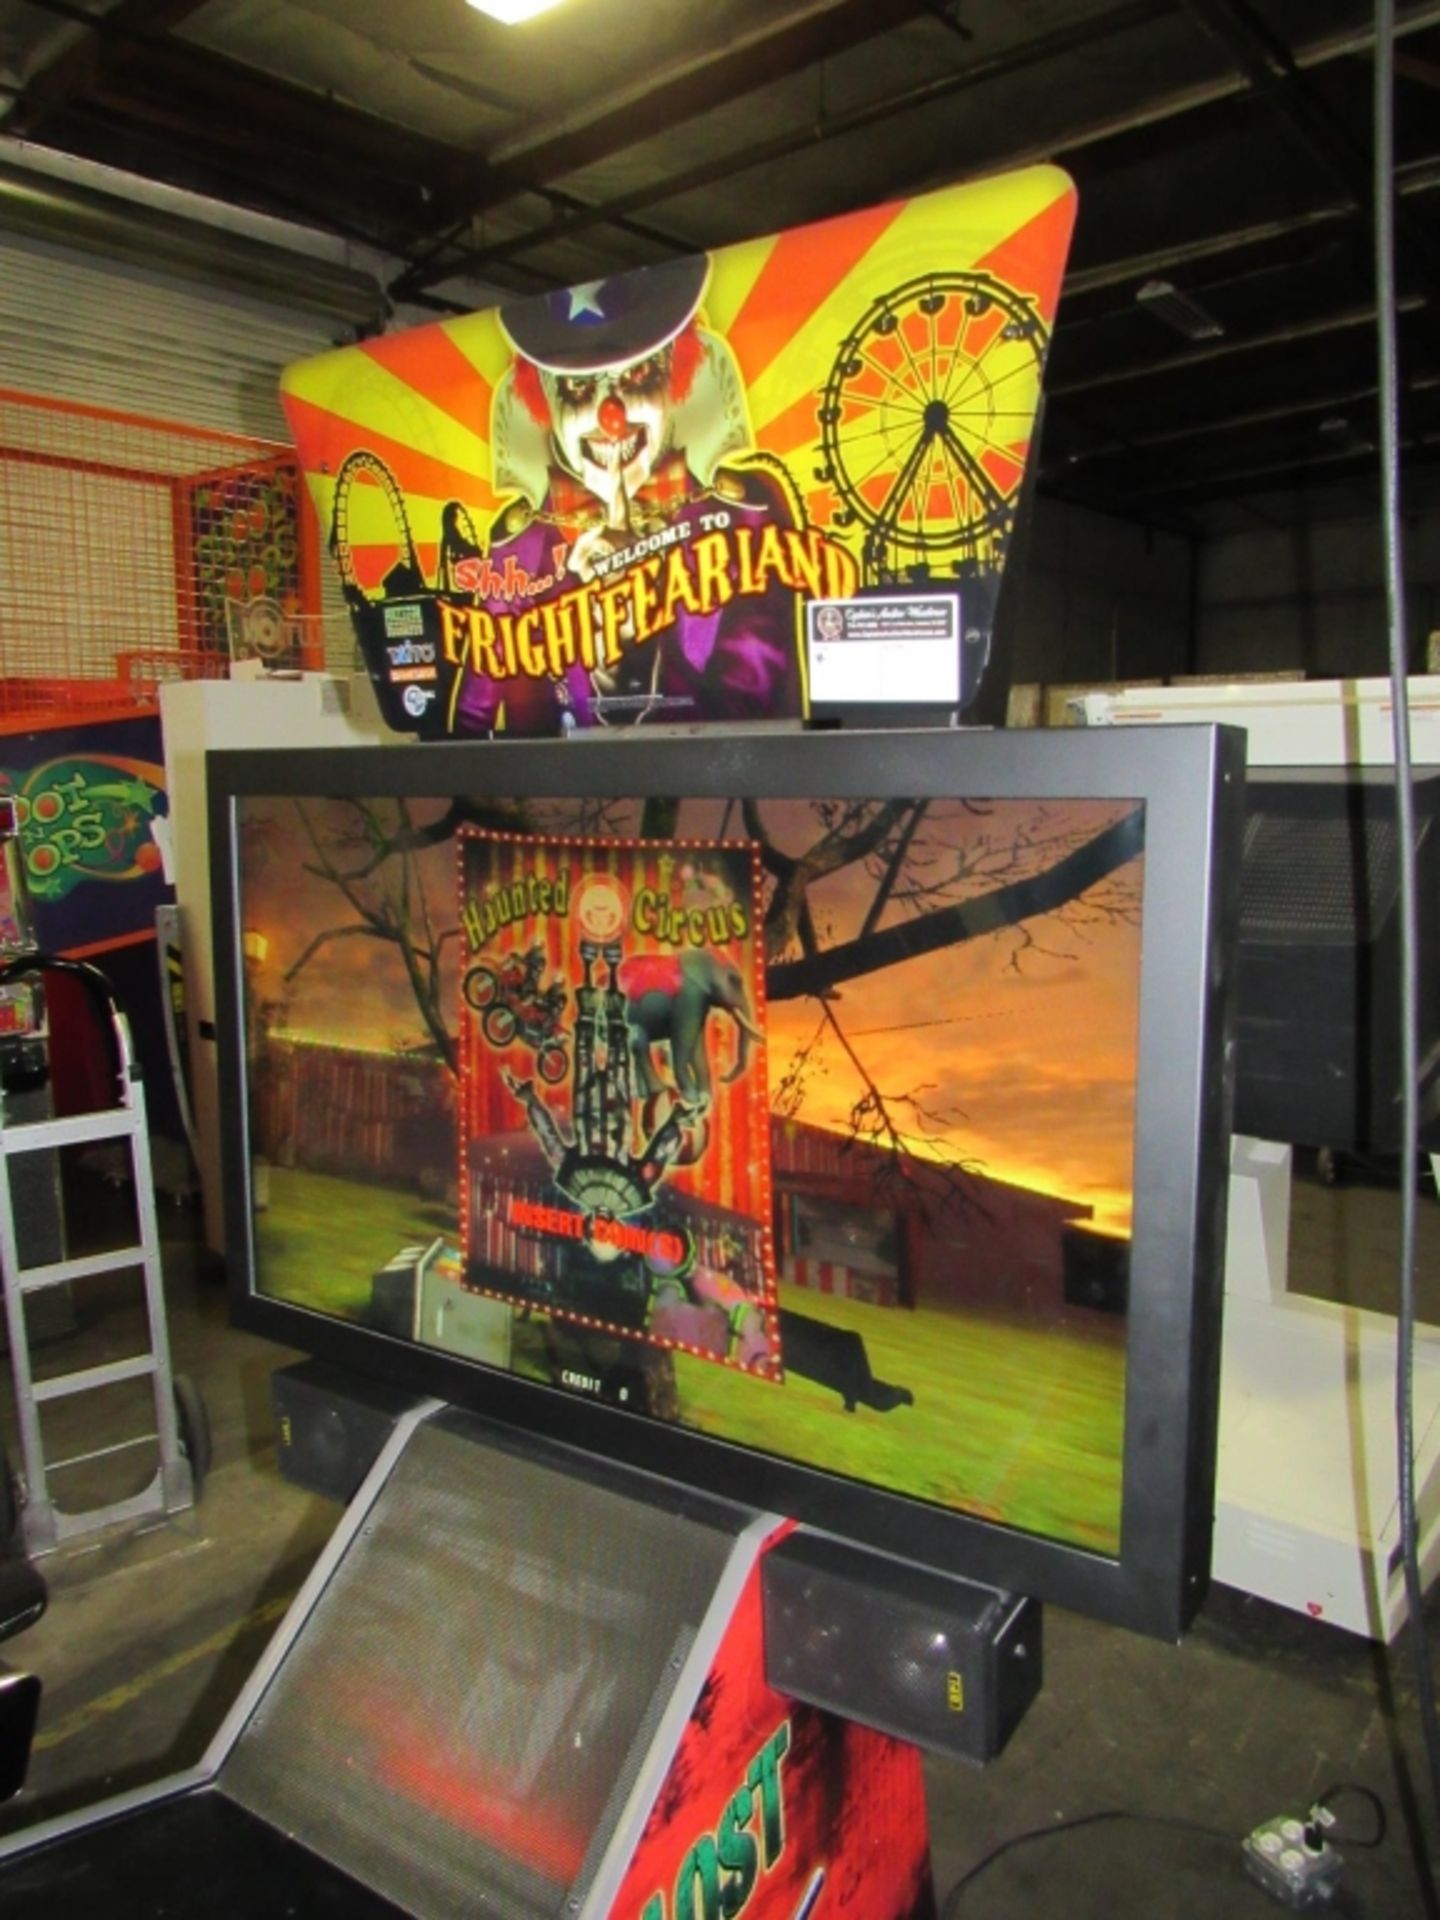 FRIGHT FEARLAND 42" LCD FIXED GUN ARCADE GAME - Image 3 of 7